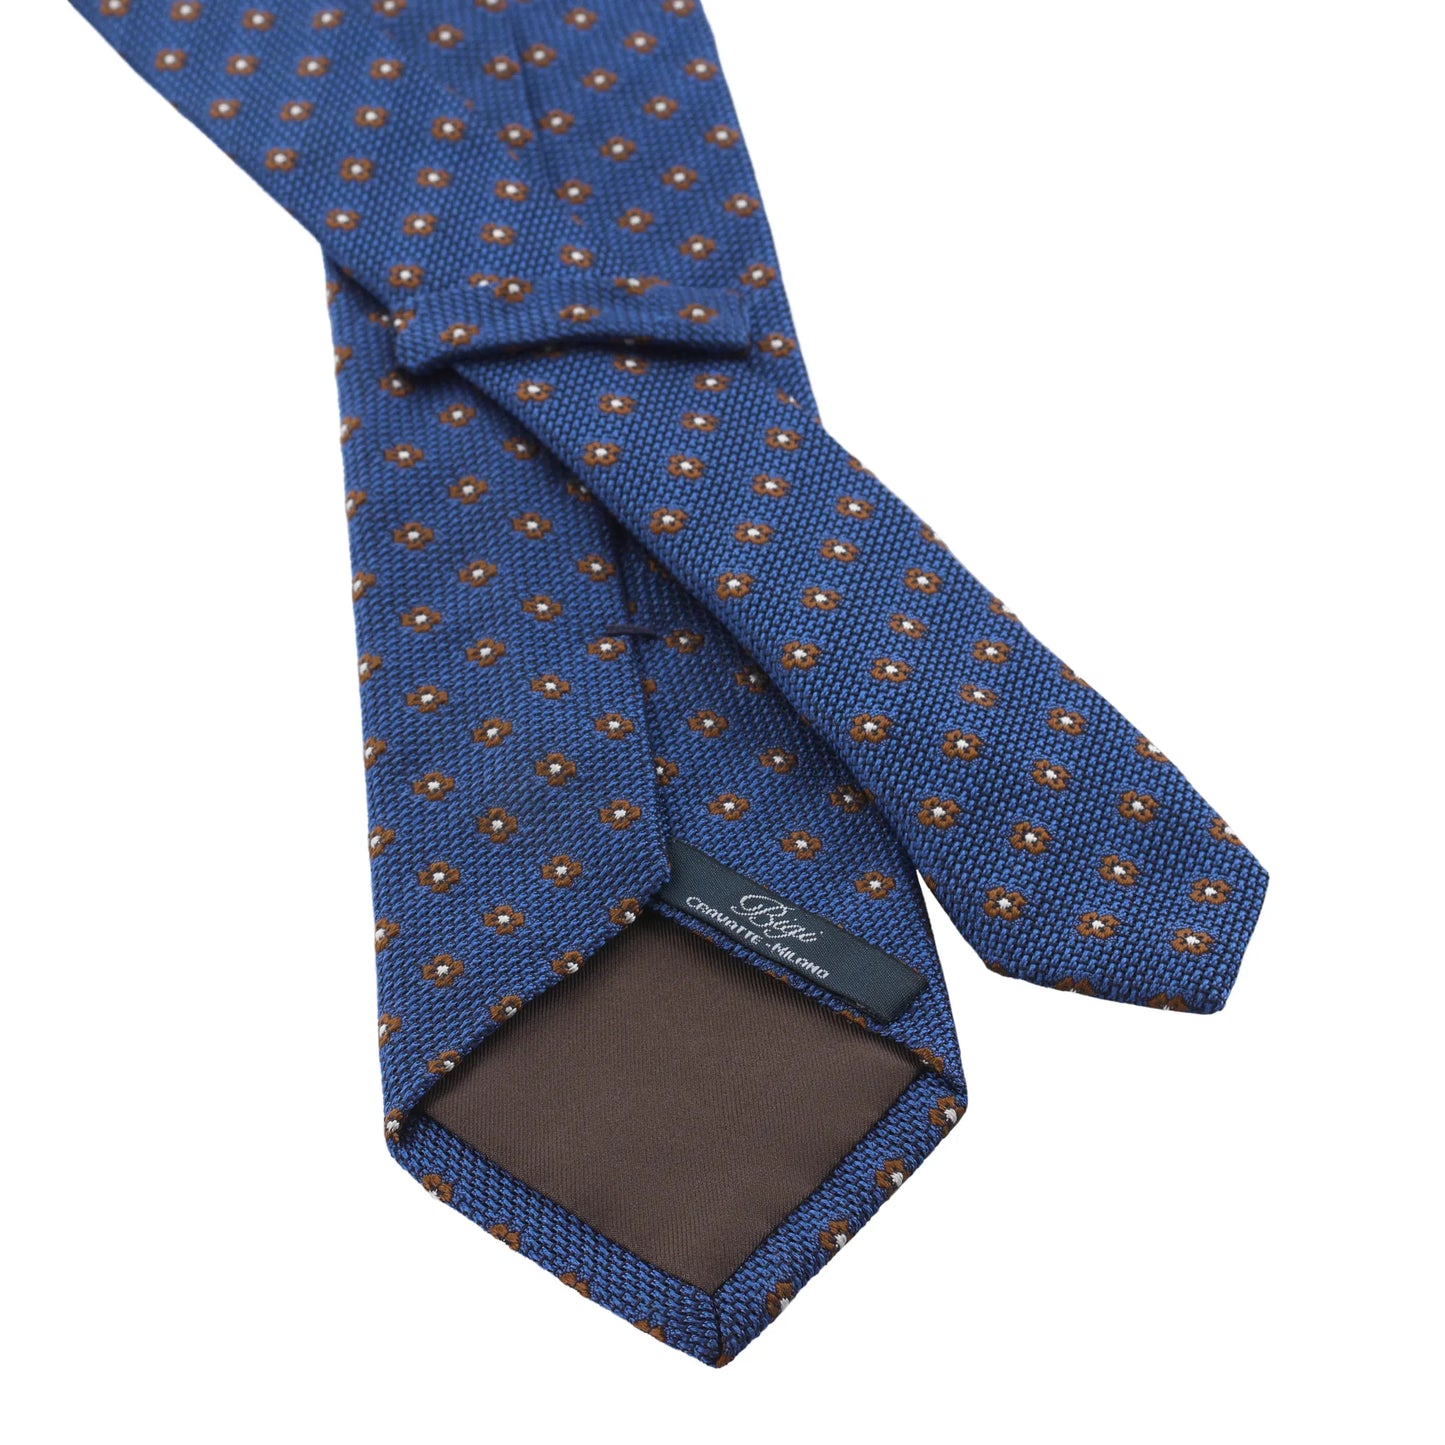 Woven Lined Blue Tie with Floral Design